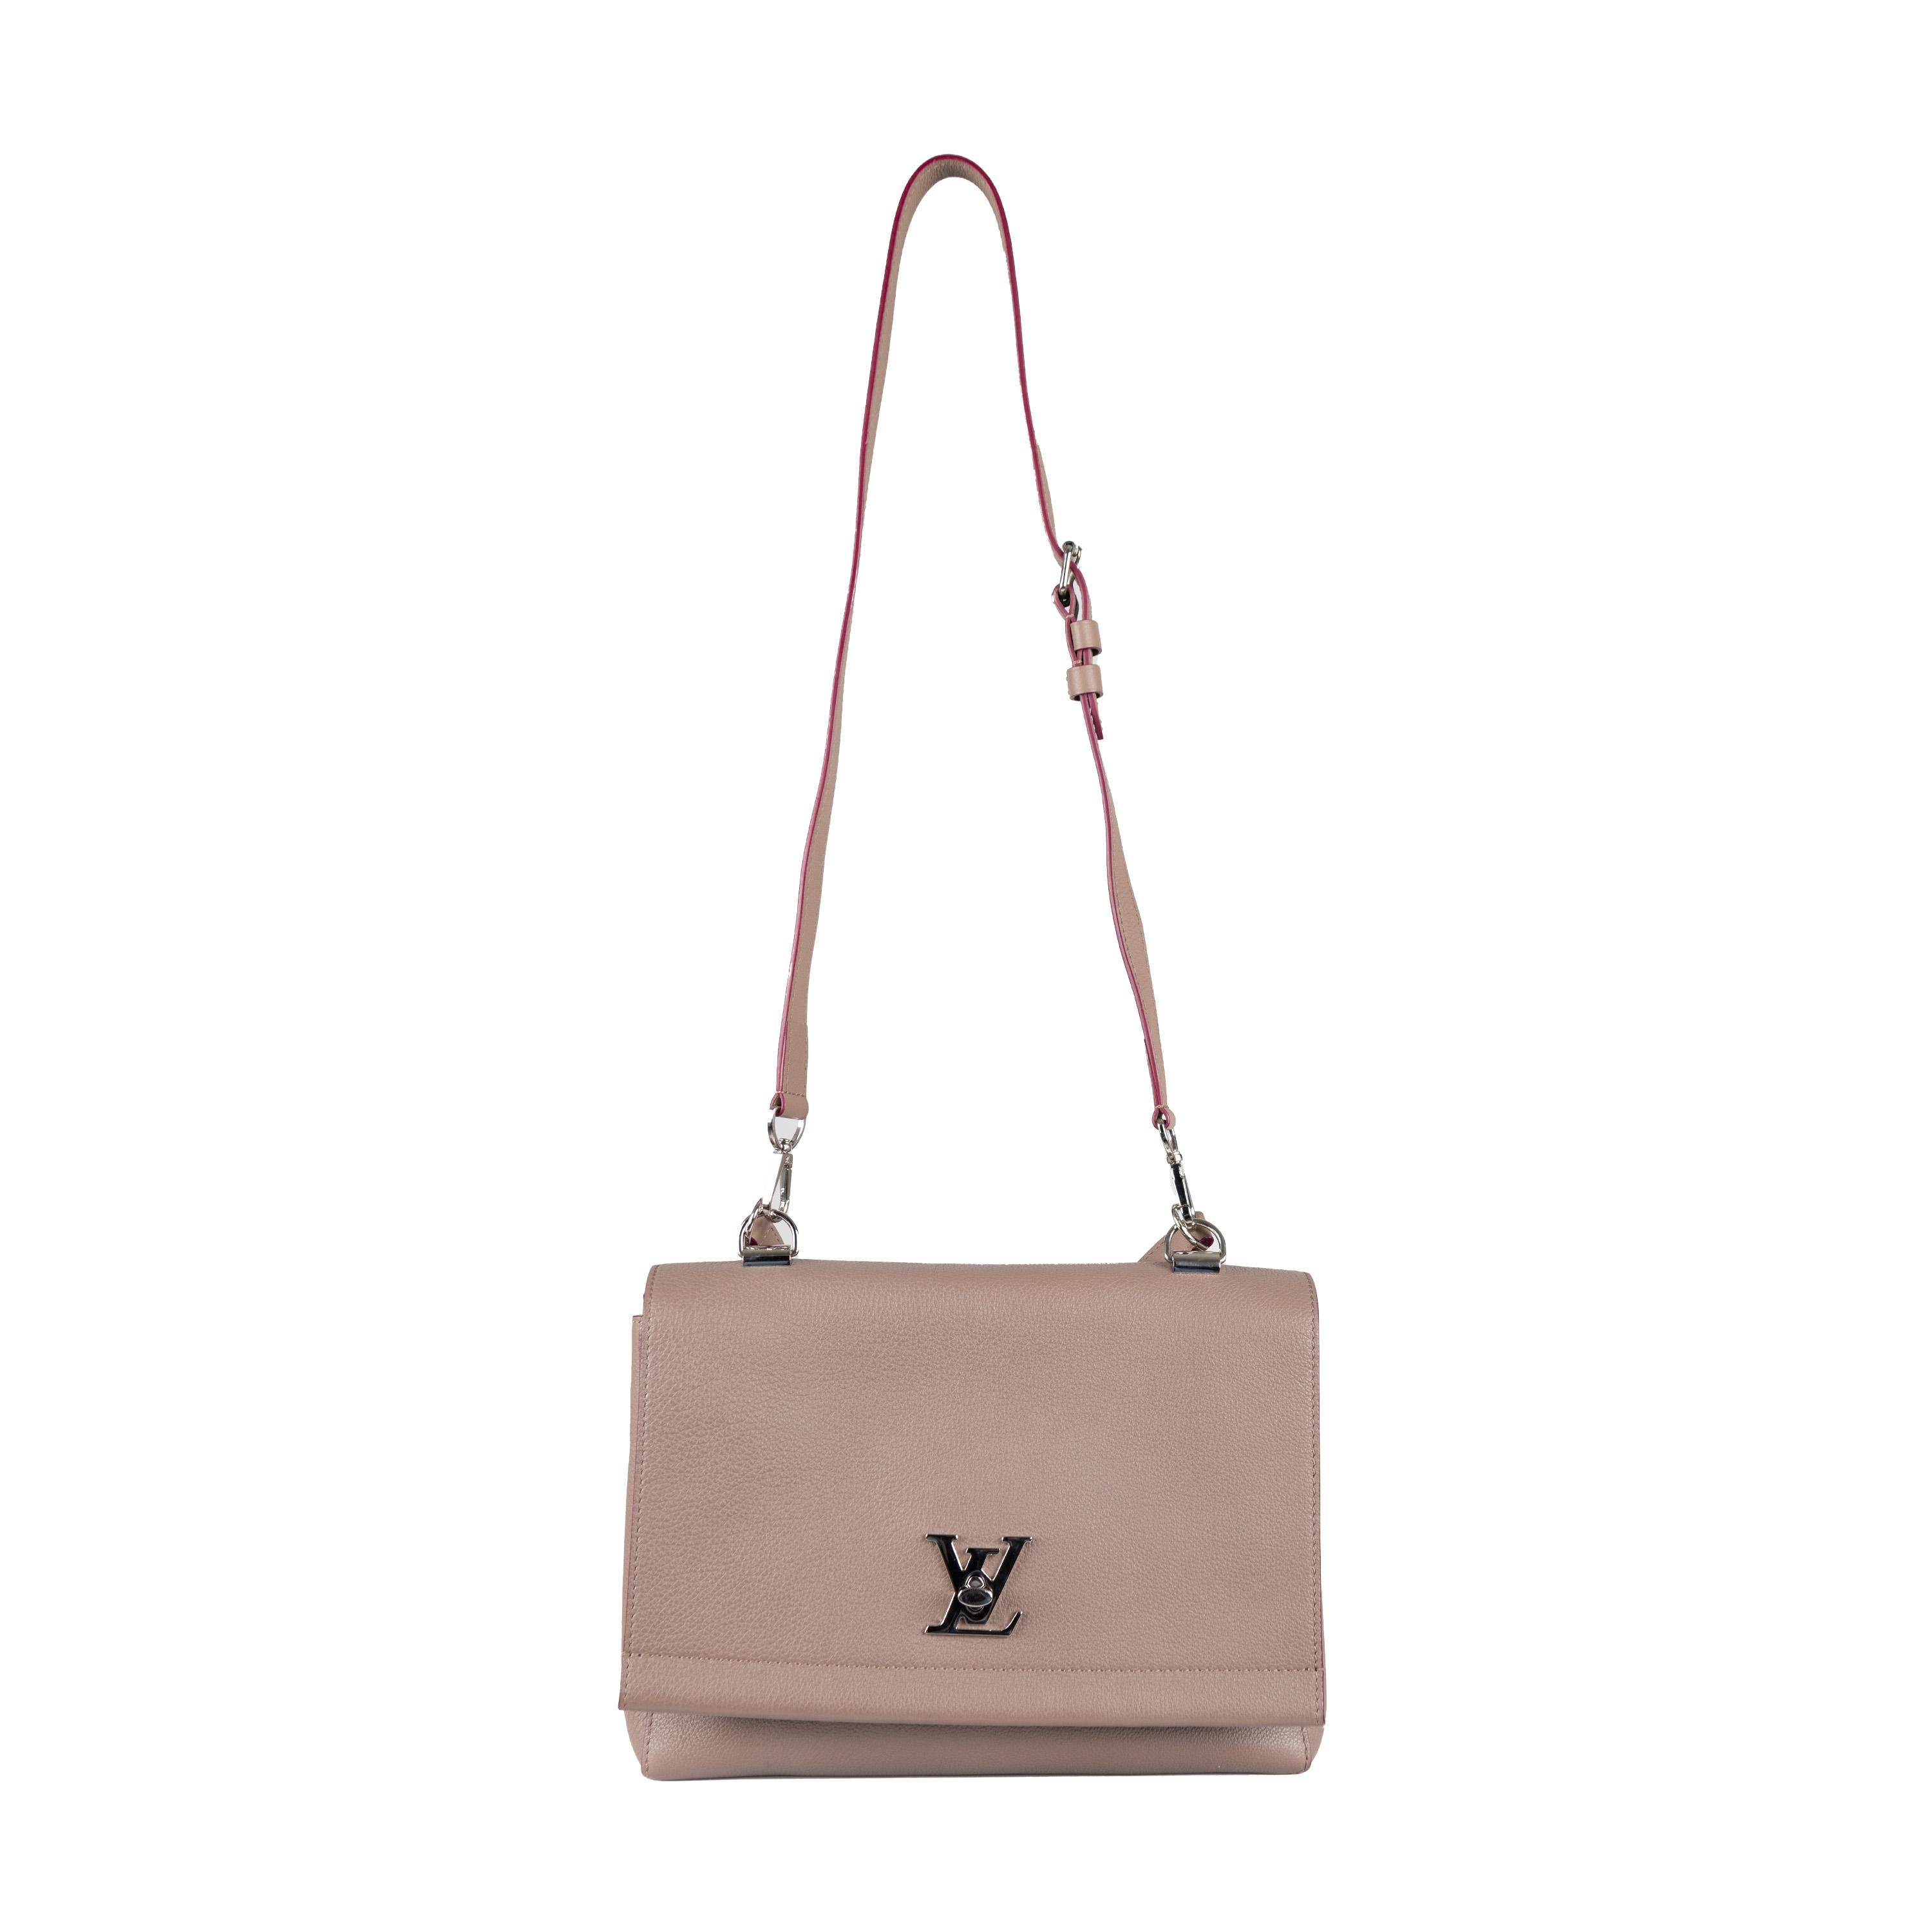 This top handle bag from Louis Vuitton's Spring 2015 collection is an updated version of the original Lockme bag. Crafted from superior quality mink color leather, it features the iconic LV Twist closure in shiny silver-tone metal.  Enjoy enhanced